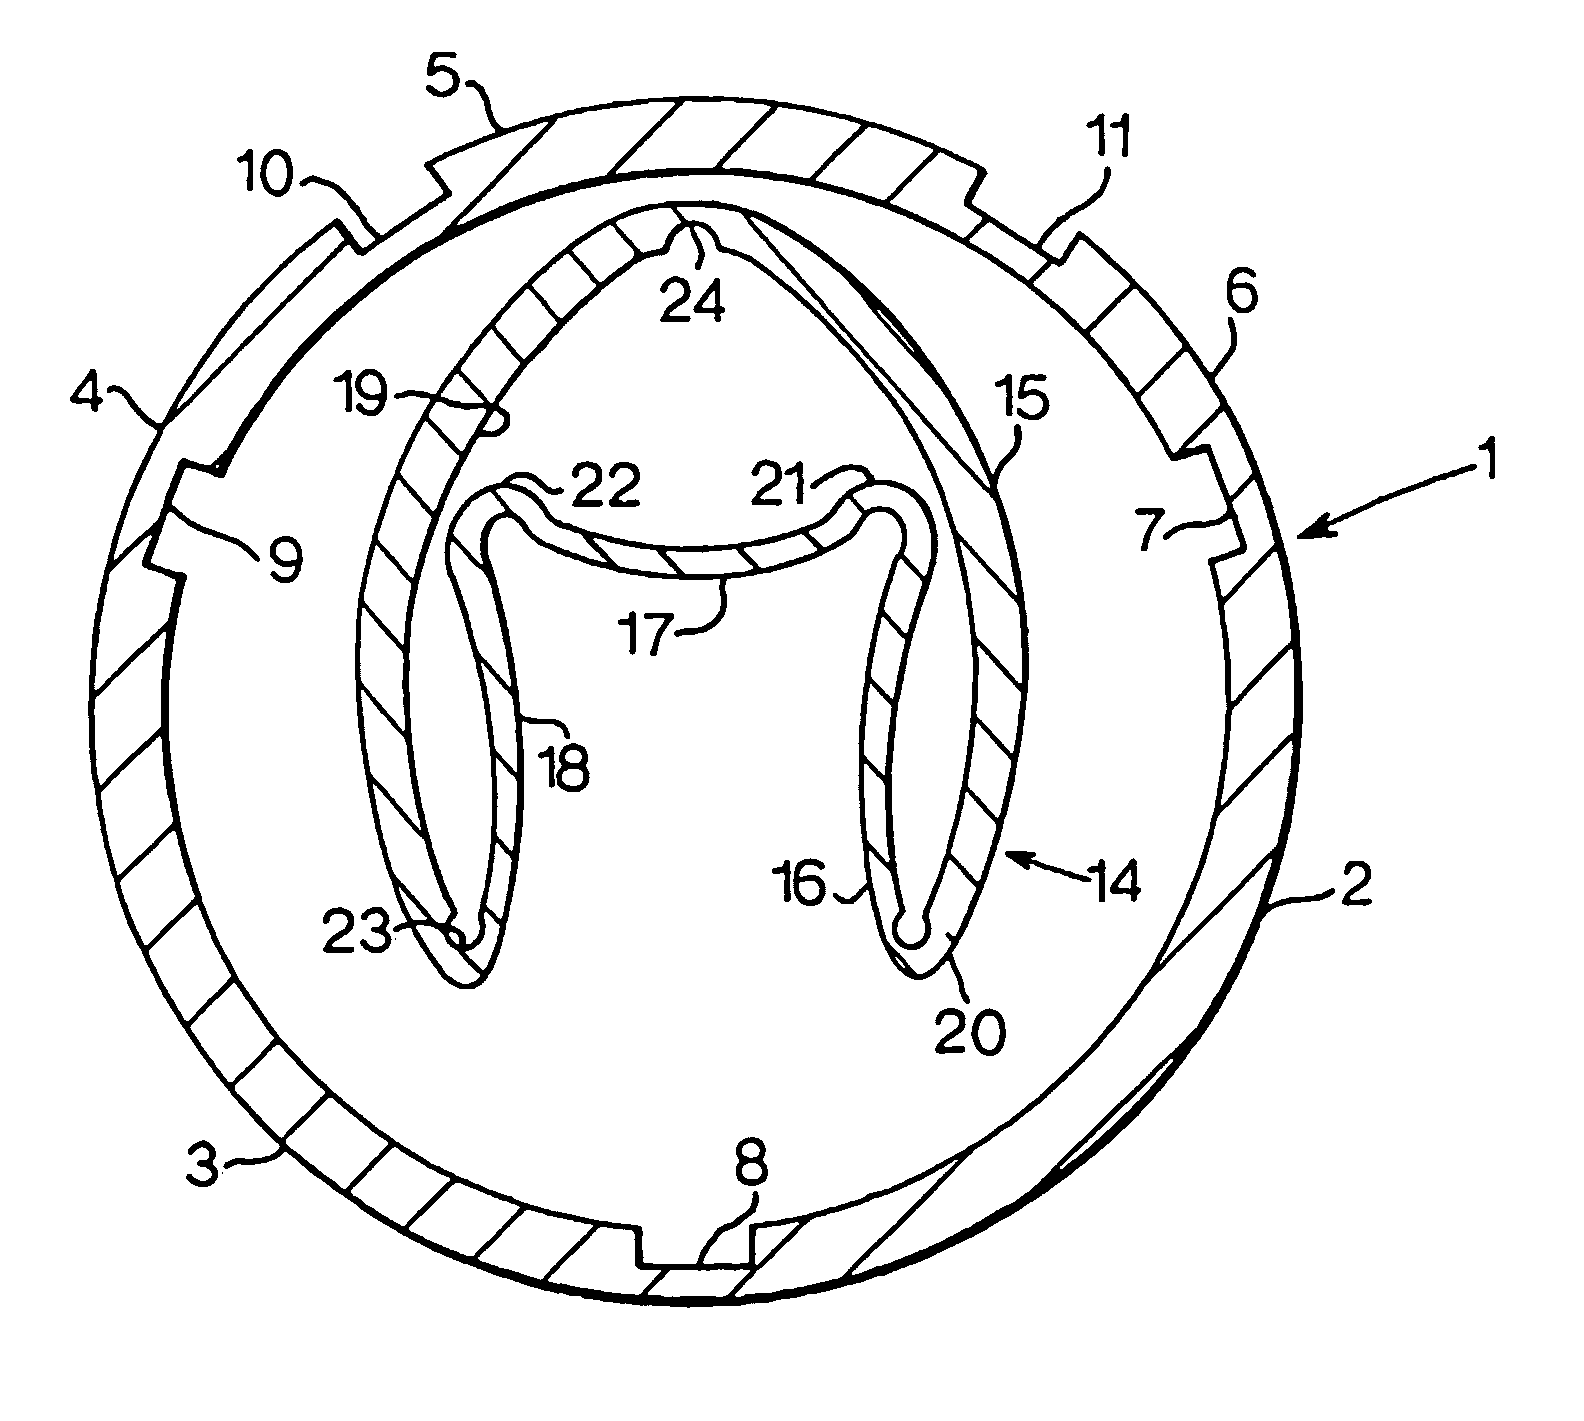 Contractable and expandable tubular wellbore system